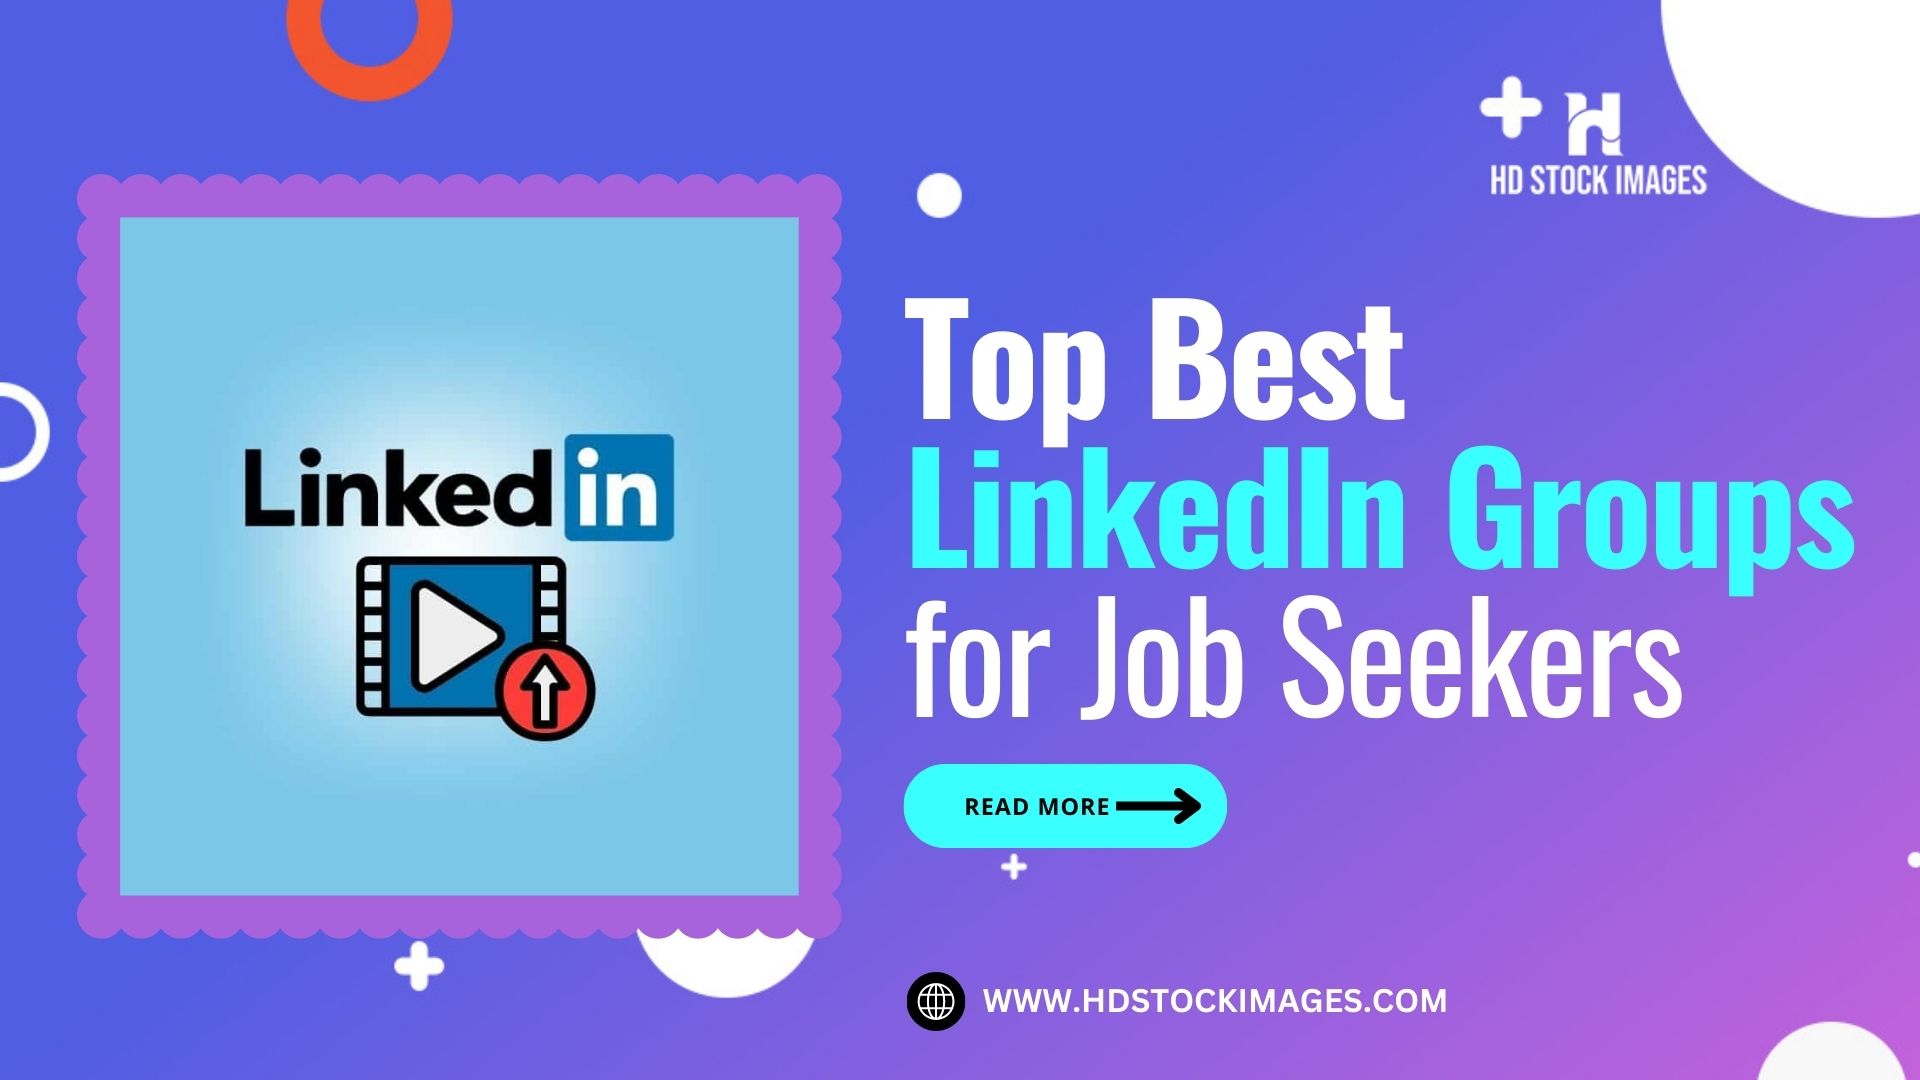 an image of List of Top Best Linkedin Groups for Job Seekers